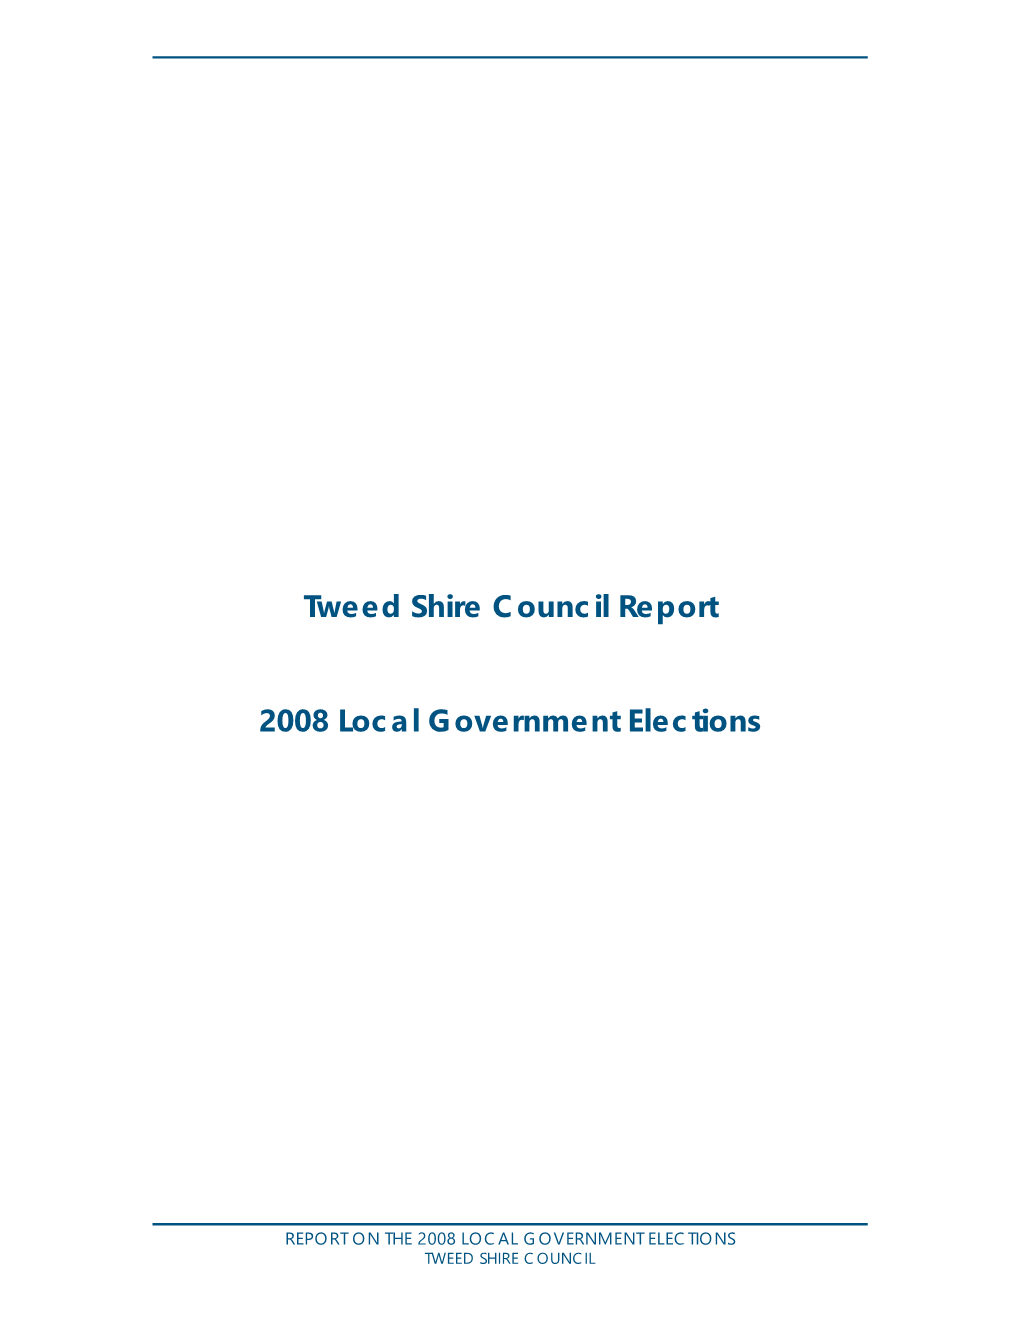 Tweed Shire Council Report 2008 Local Government Elections